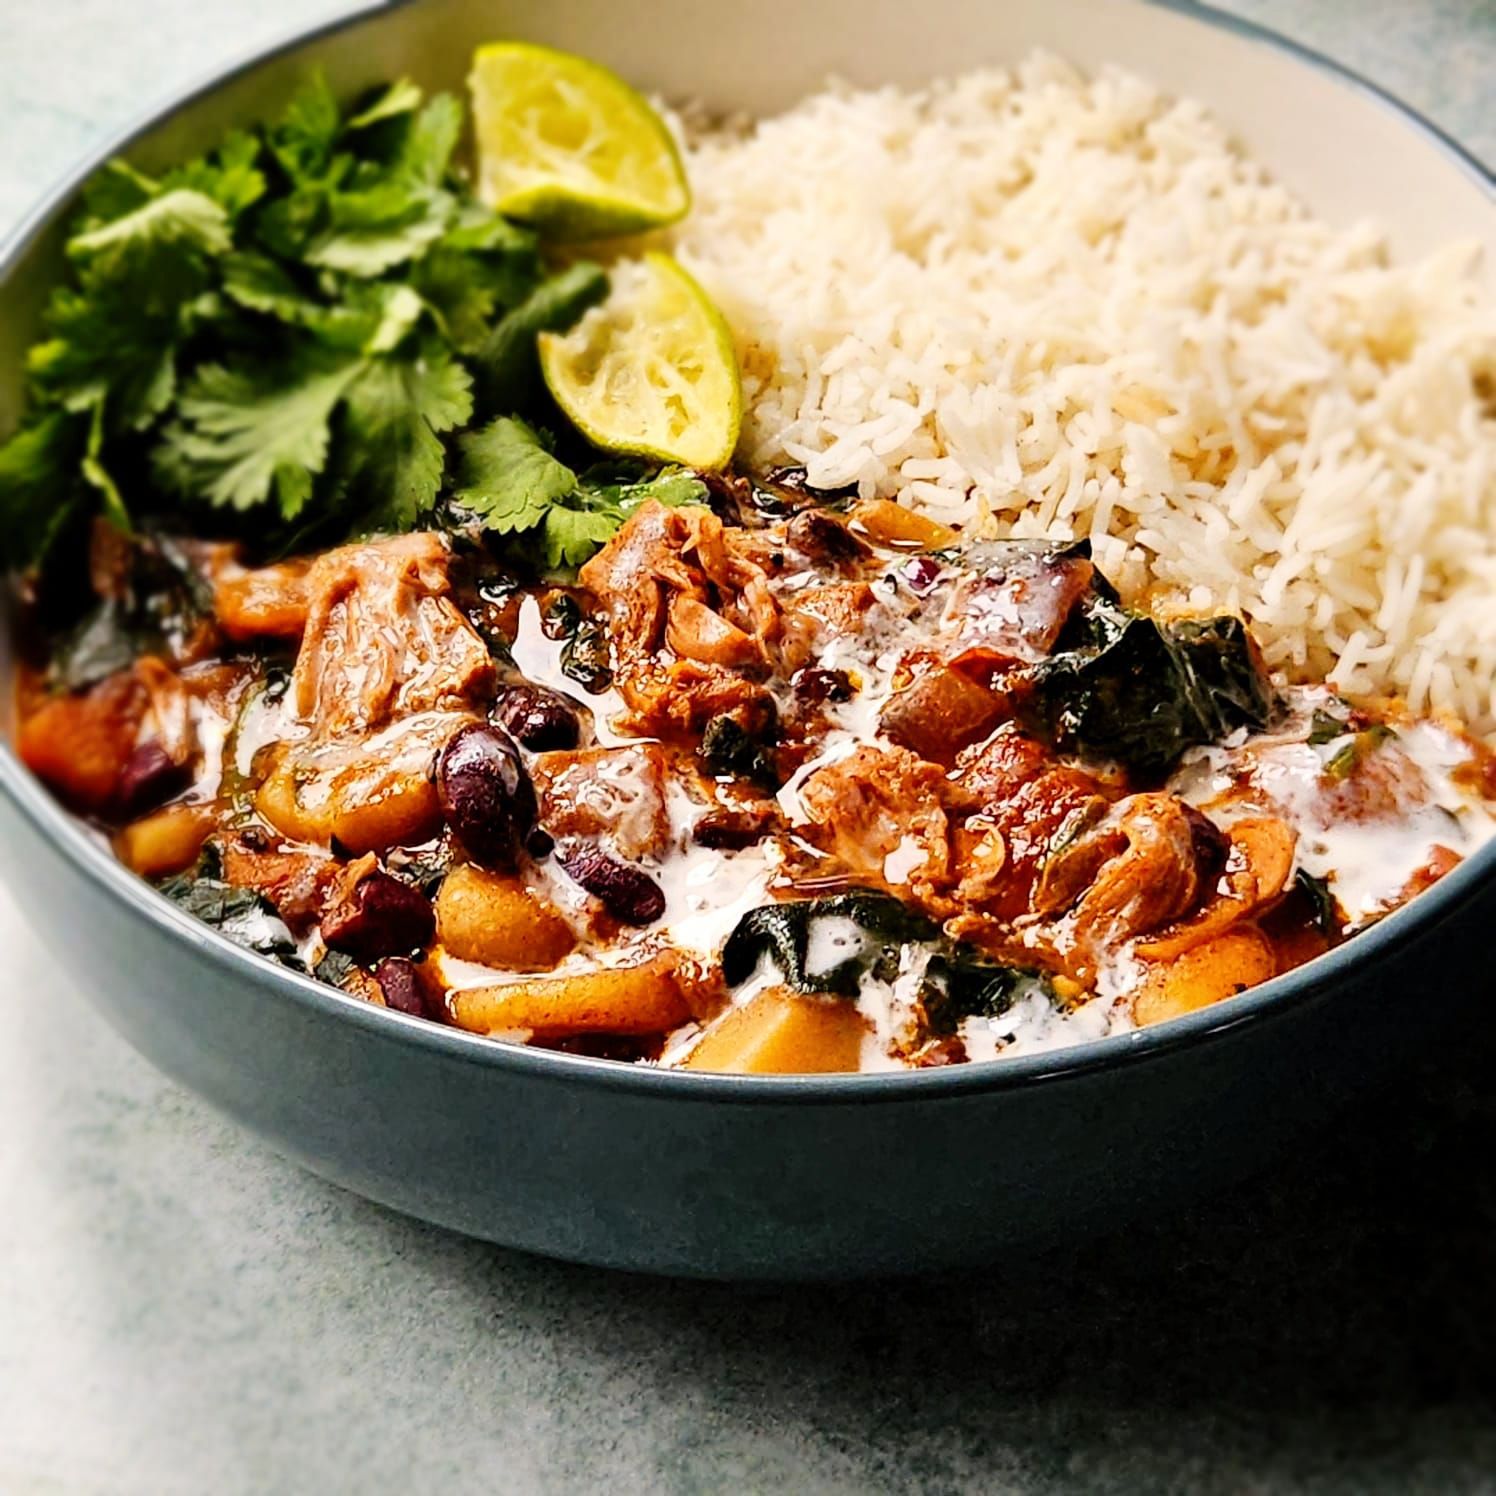 Jamaican Jerk Jackfruit and red bean stew in a bowl with rice, fresh coriander, and sliced lime wedges